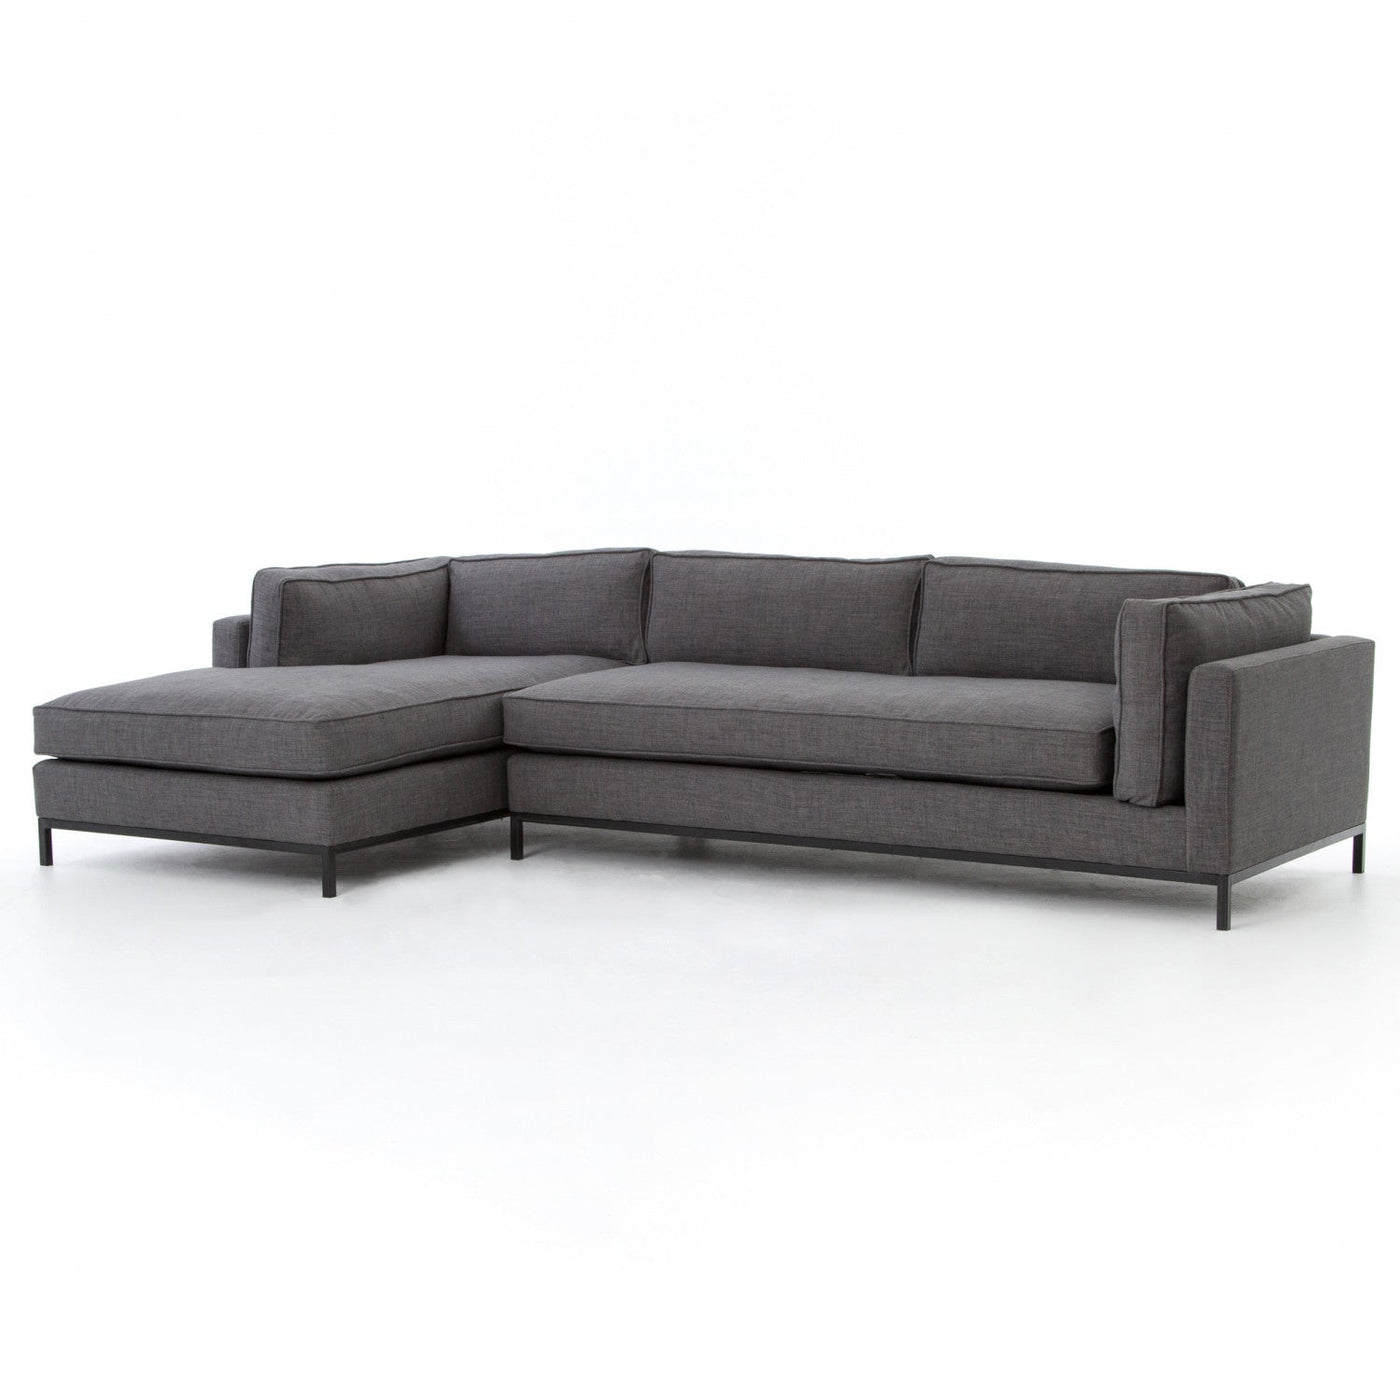 Grant Sectional Sofa with LEFT Chaise - Charcoal